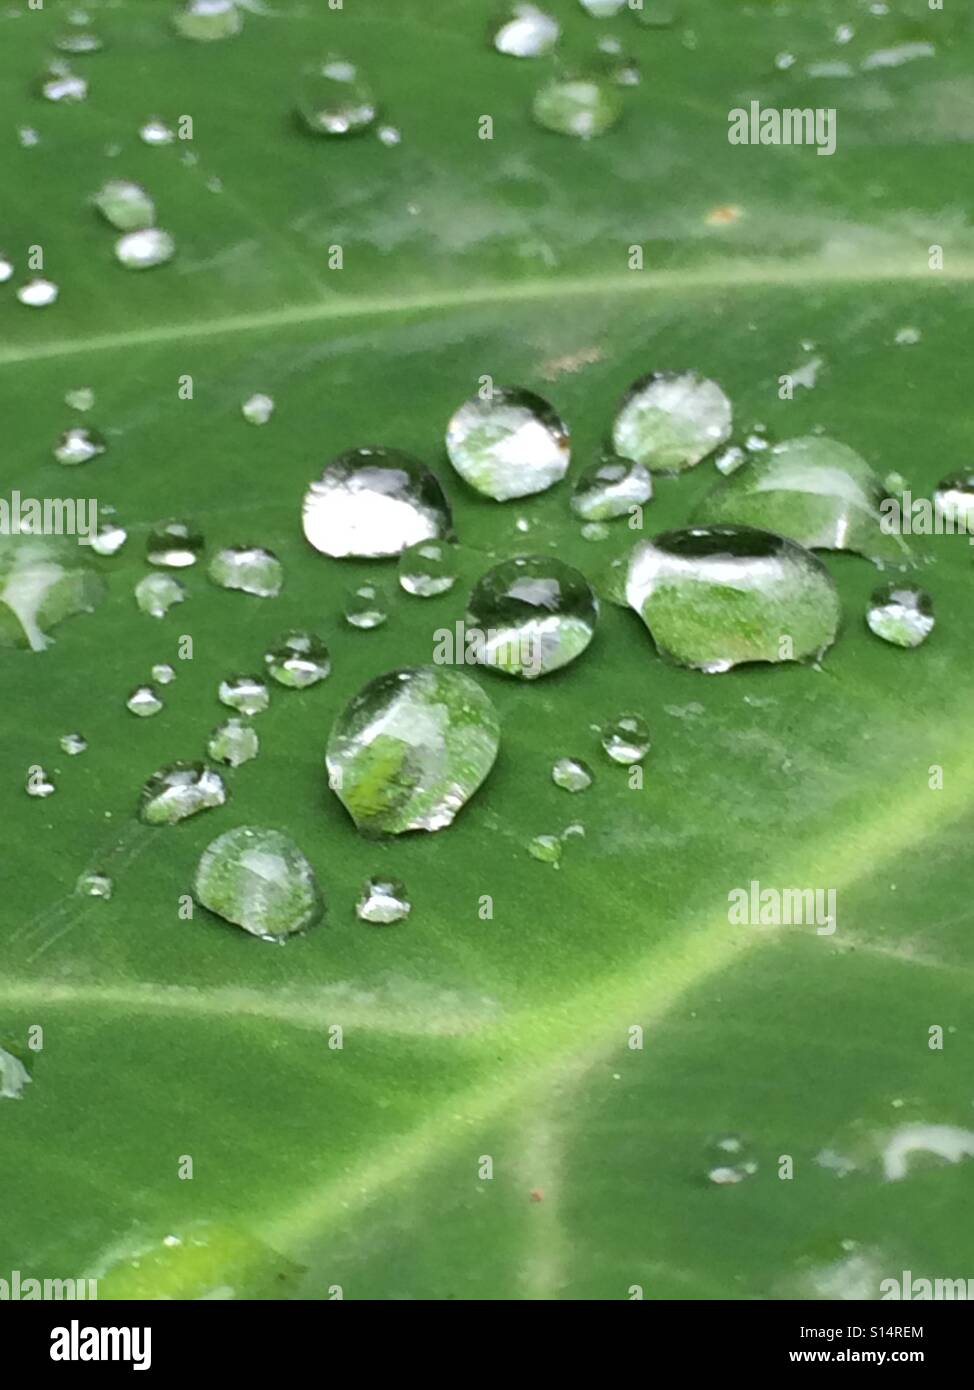 Shimmering mosaic of rain water droplets on a leaf. Stock Photo